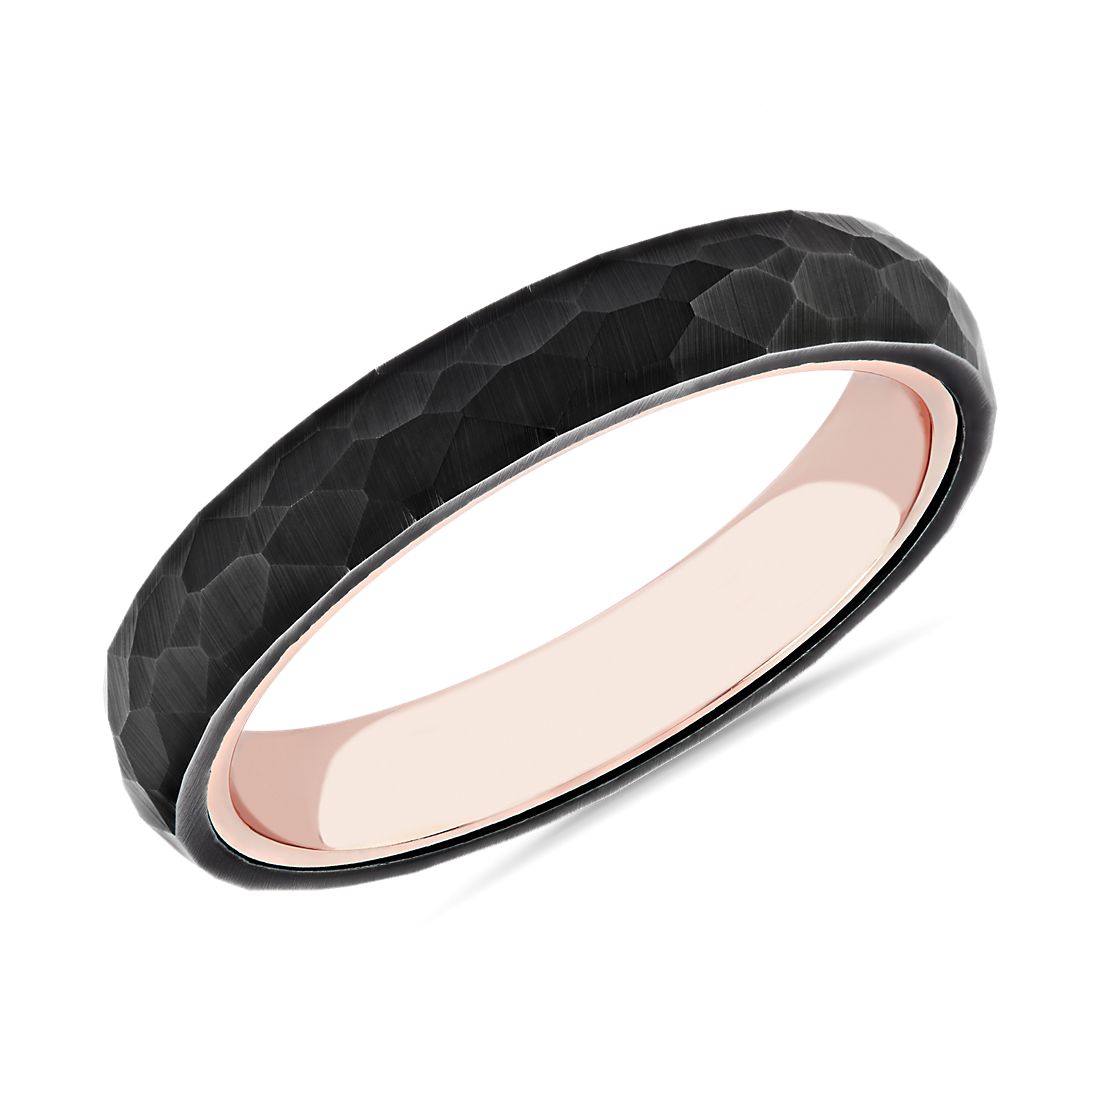 Hammered Flat Edge Contemporary Ring in Tungsten and 14k Rose Gold (4 mm)